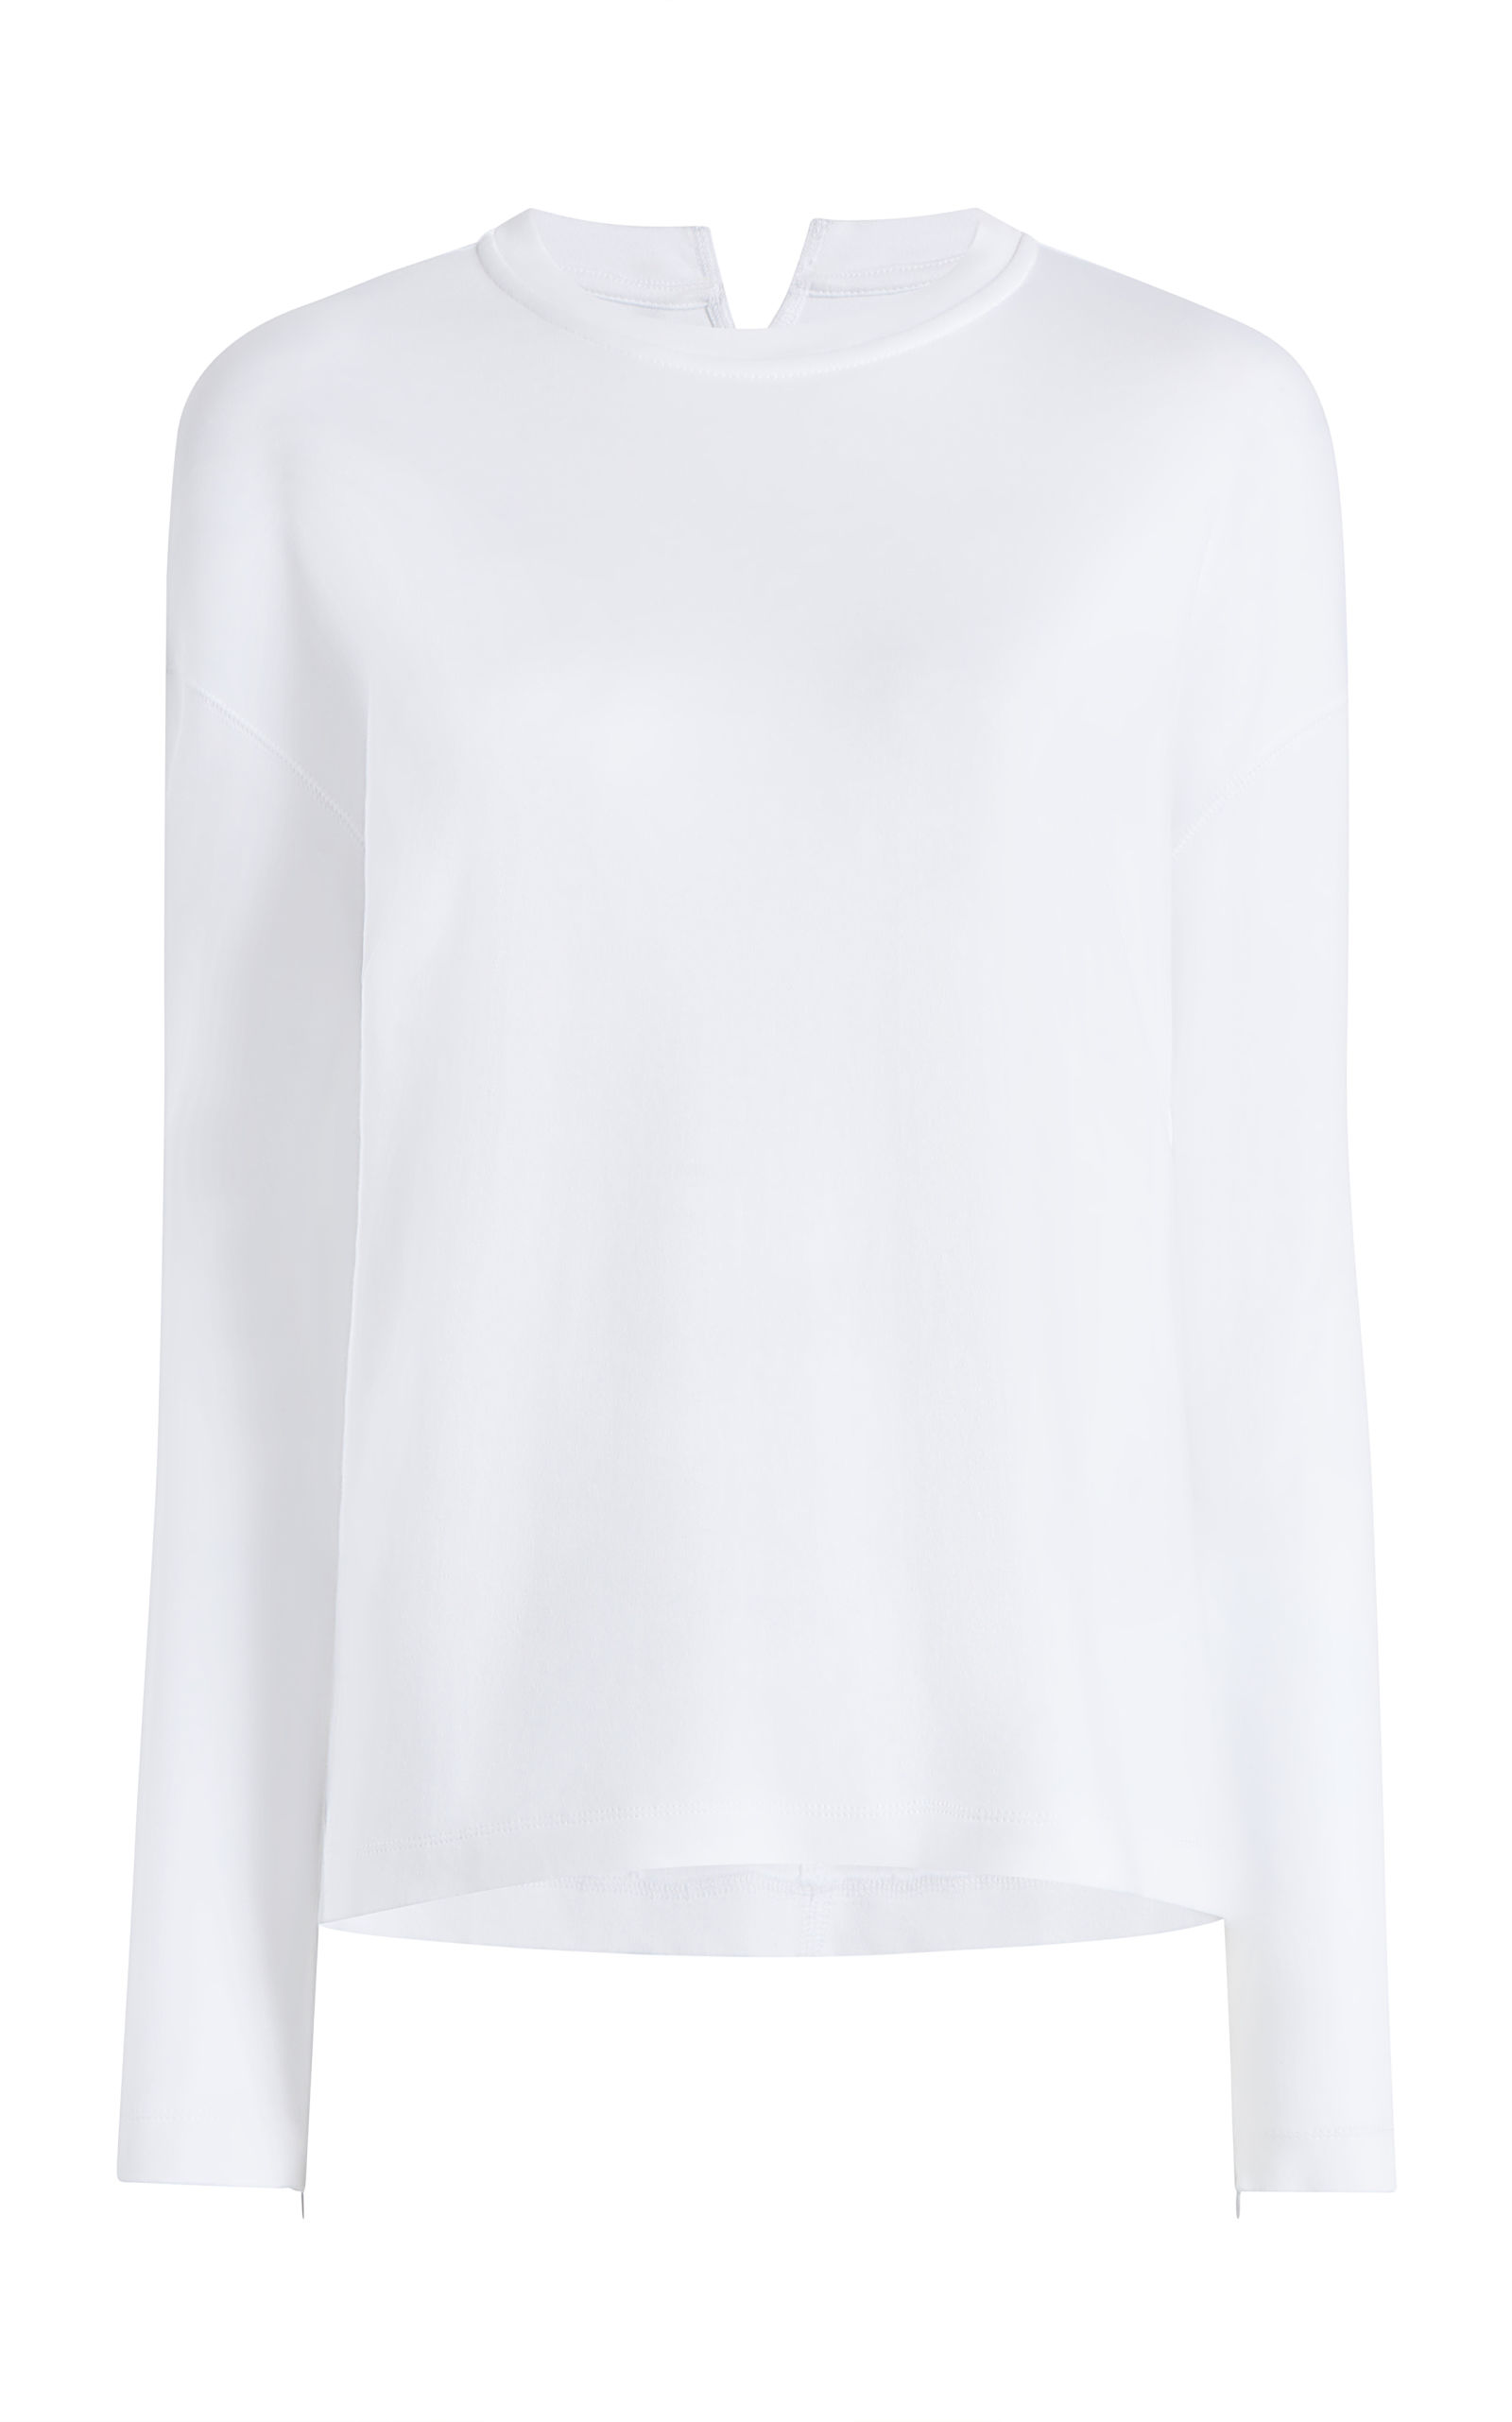 LUXE SEAMED LONG SLEEVE WHITE A123CT036-CO-WHT